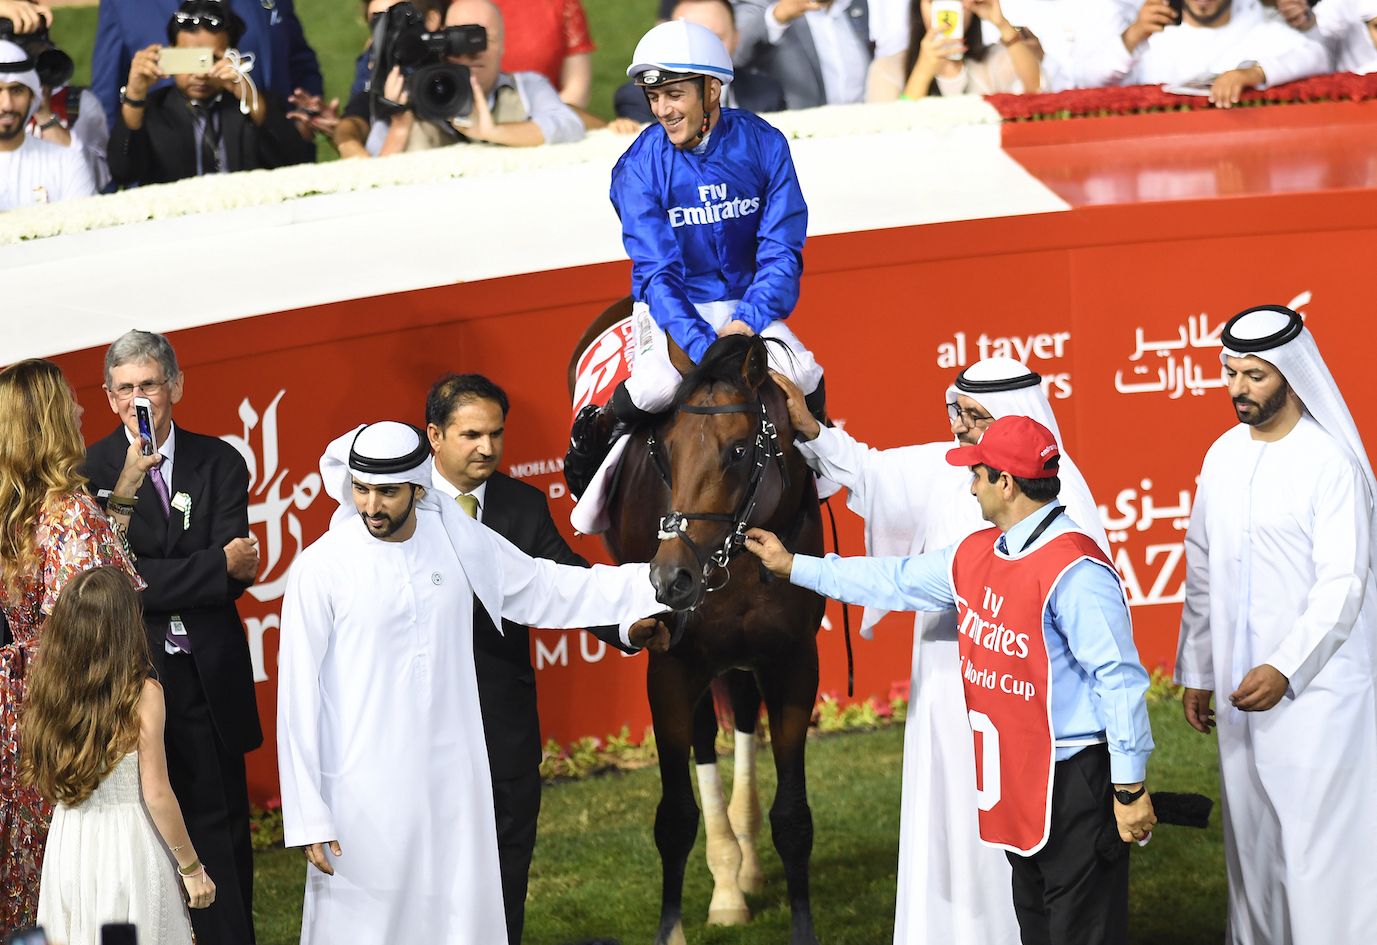 Christophe Soumillon enjoys the moment as Thunder Snow is feted in the winners’ enclosure after the race. Saeed Bin Suroor is on the right. Photo: Dubai Racing Club